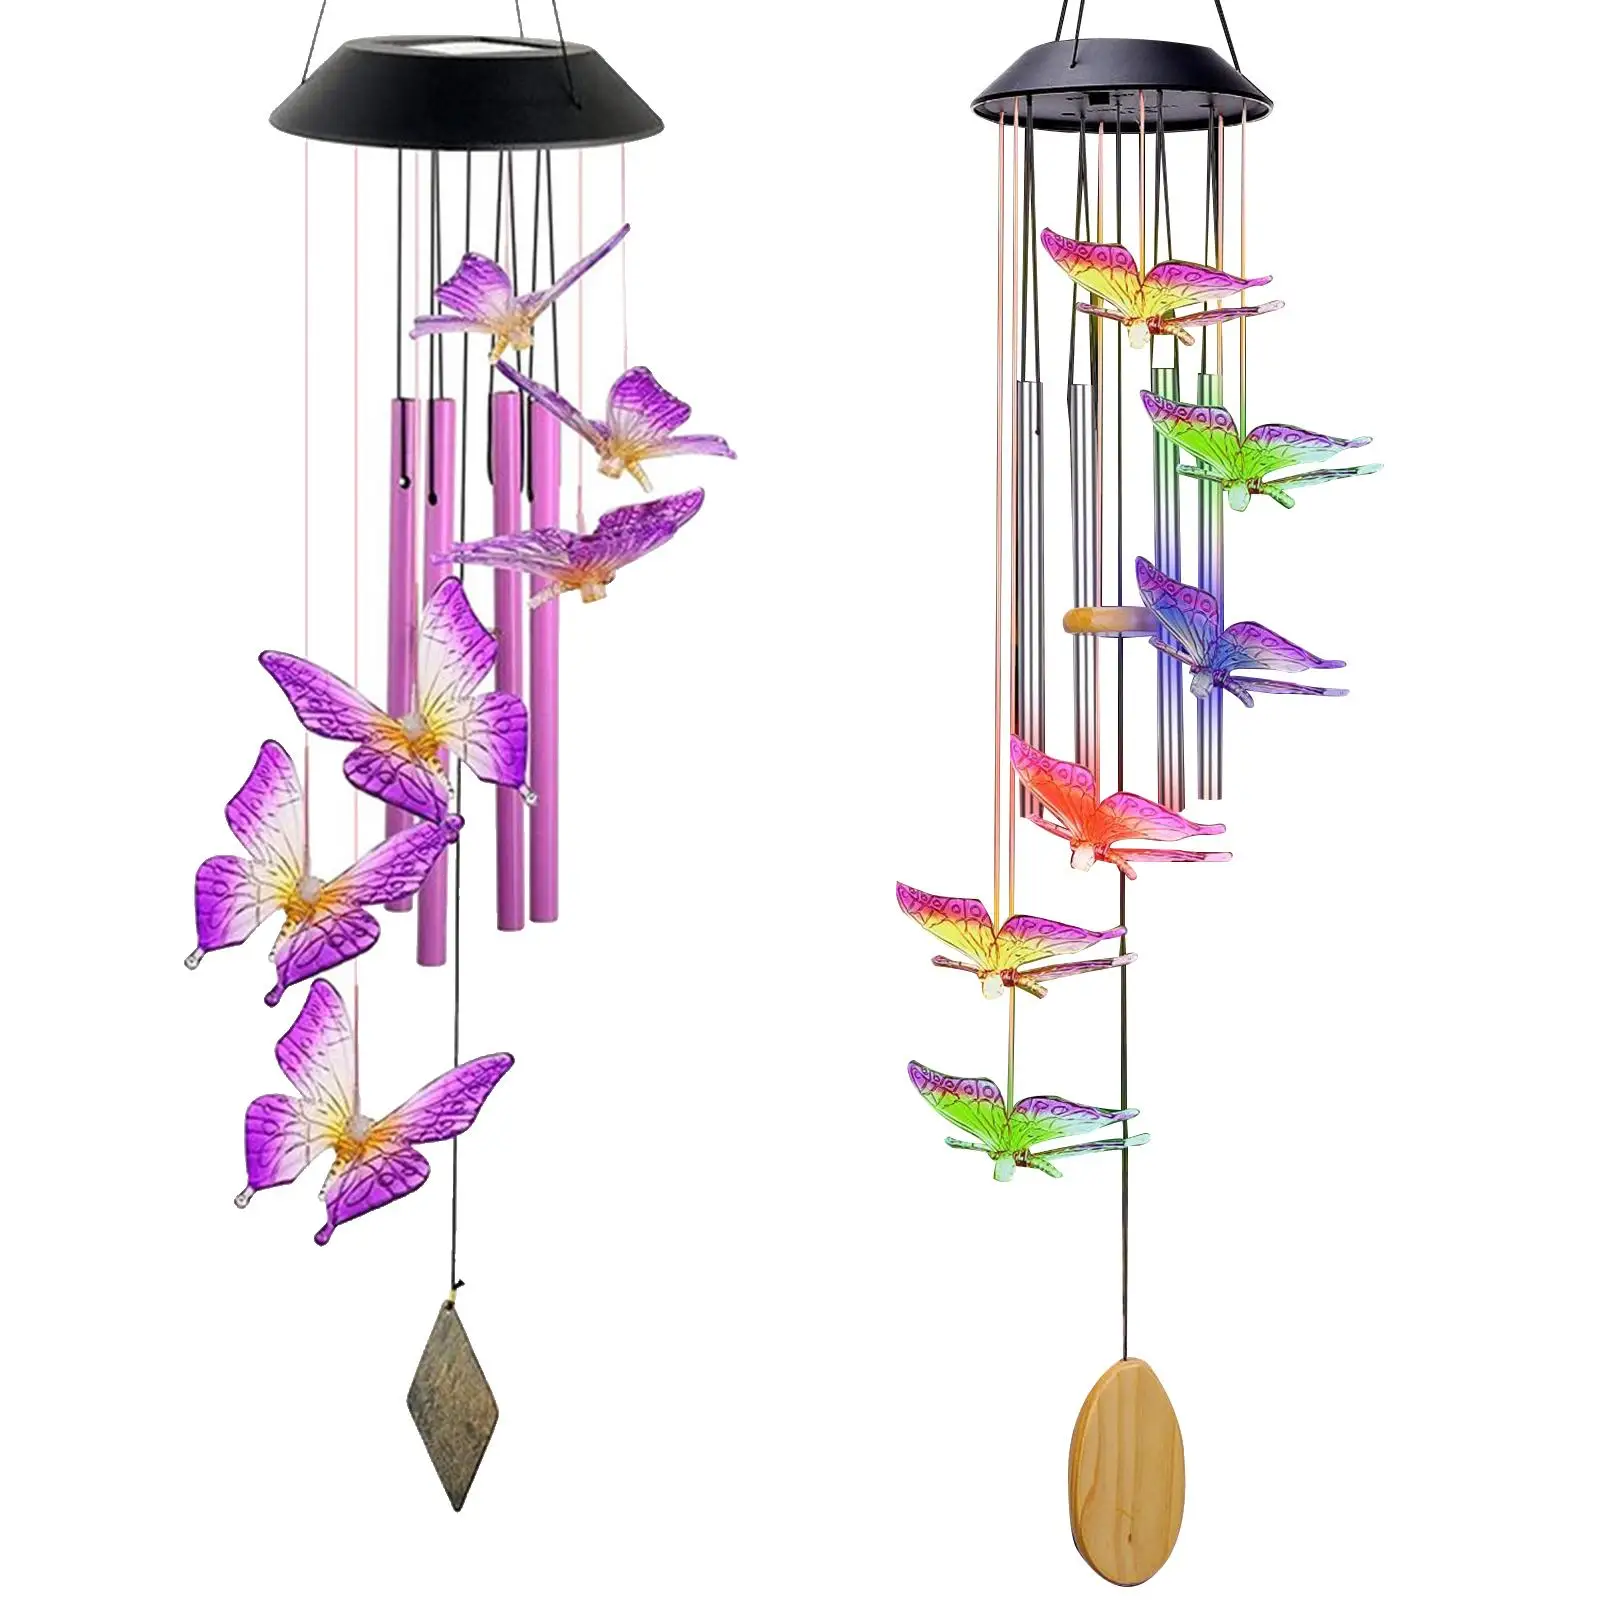 Solar Wind Chimes Automatical Color Changing Hanging Decorative Patio Lights for Birthday Porch Room Indoor Garden